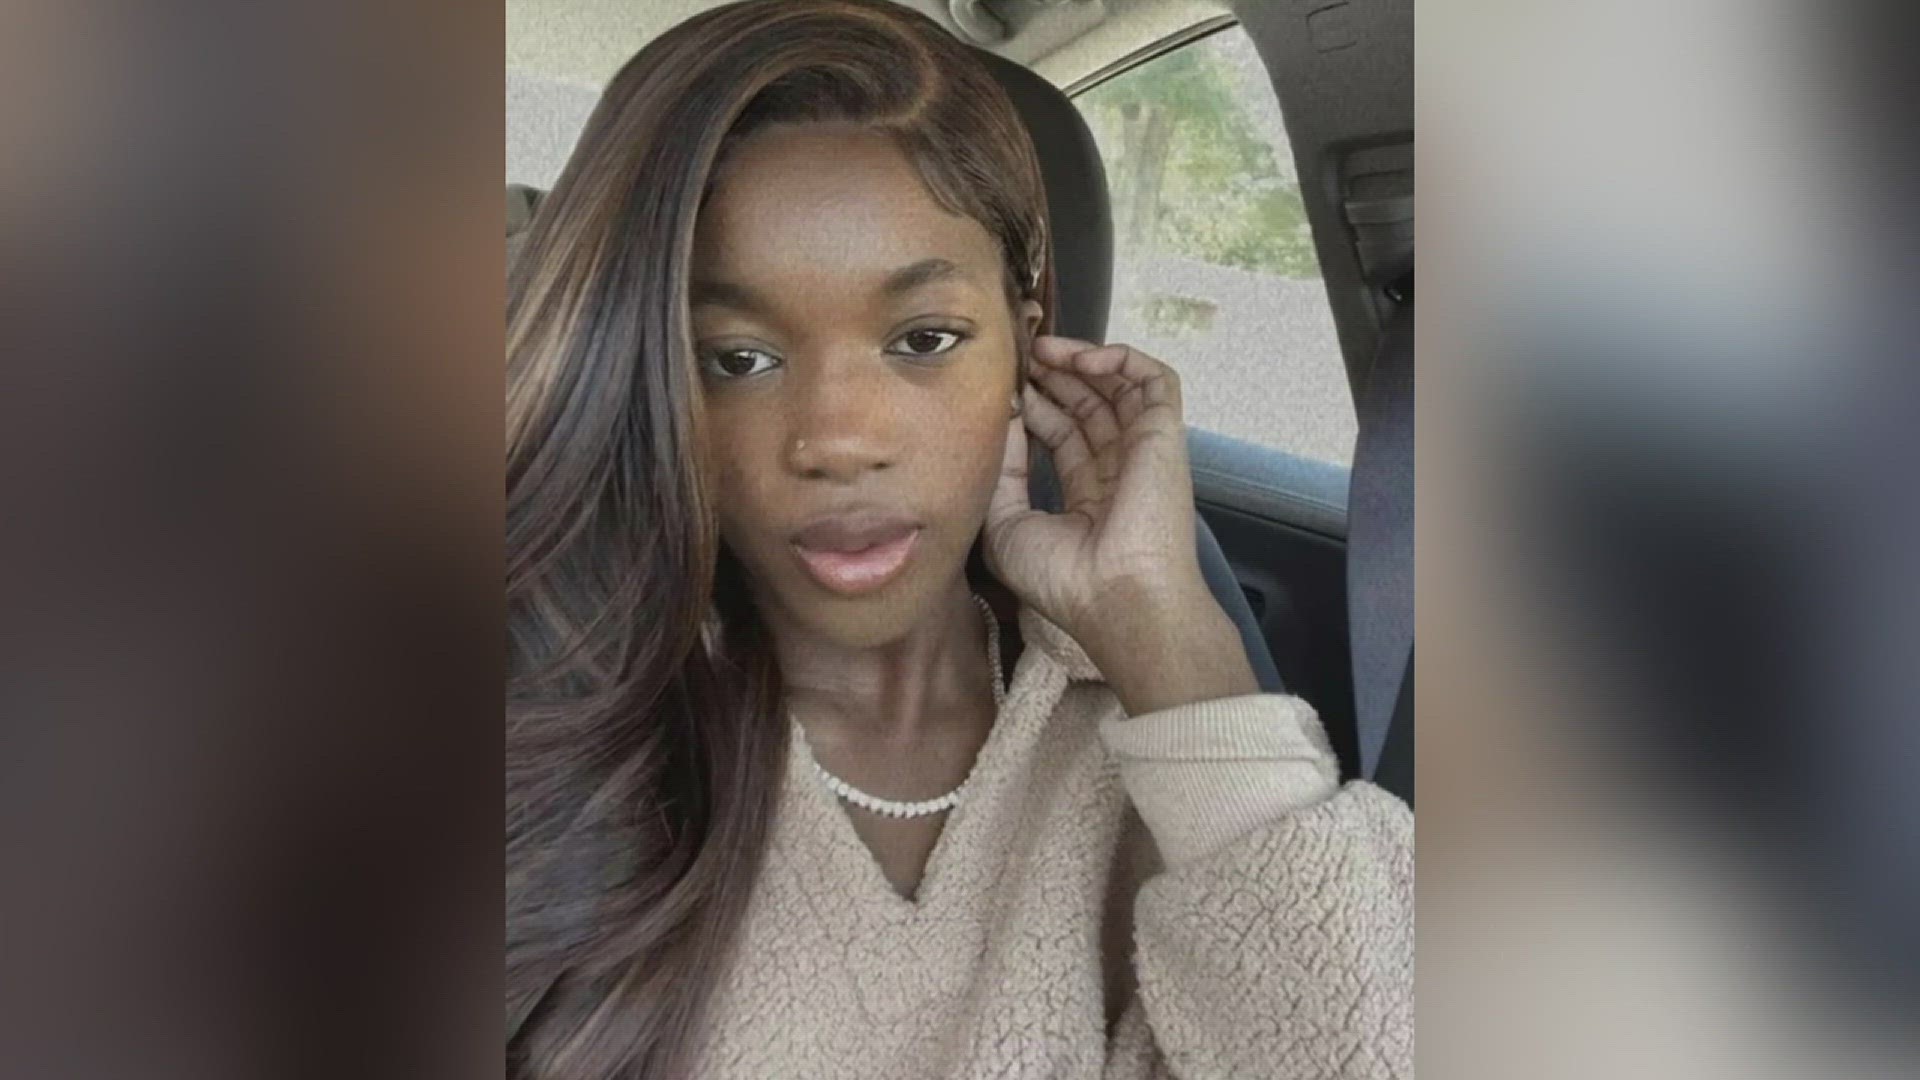 The body of Rosalin Lewis, 24, was found early Saturday morning after Jasper Police officers were called to the Myrtis Village Apartments at about 4 a.m.